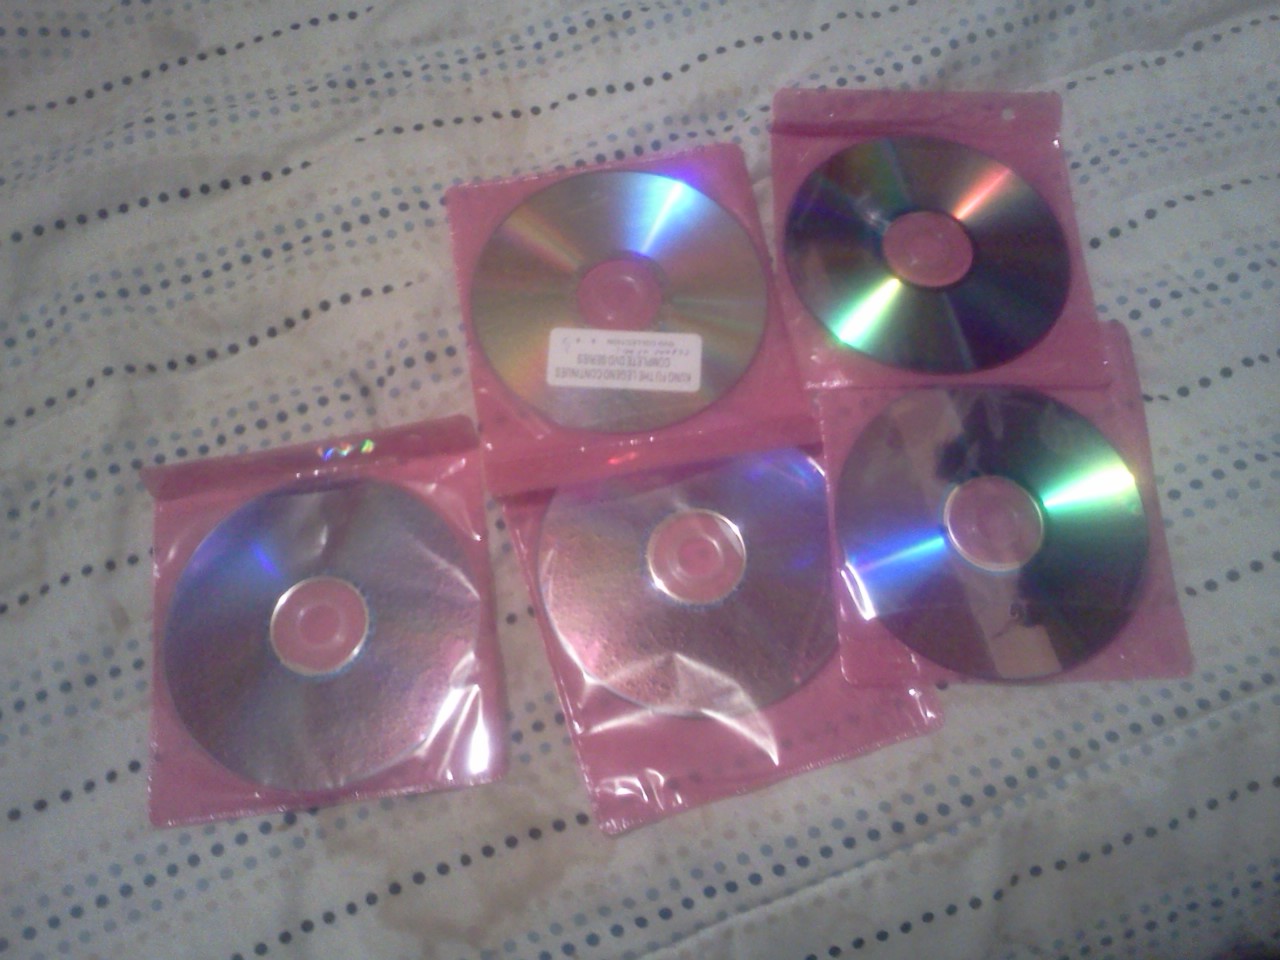 the so called dvds they sent me.